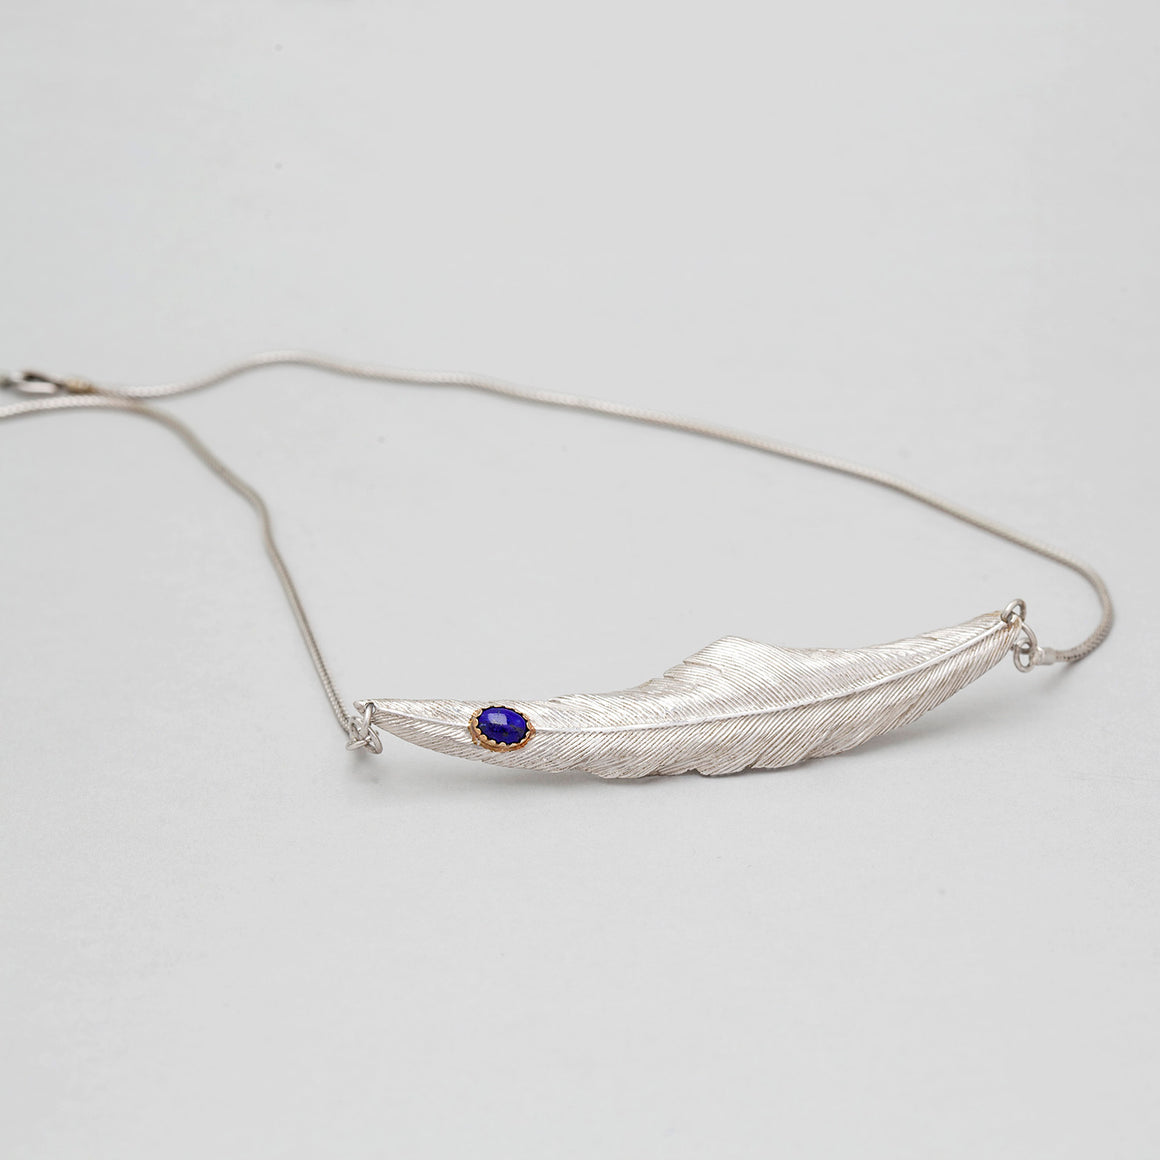 STERLING SILVER FEATHER NECKLACE WITH LAPIS IN GOLD CAP